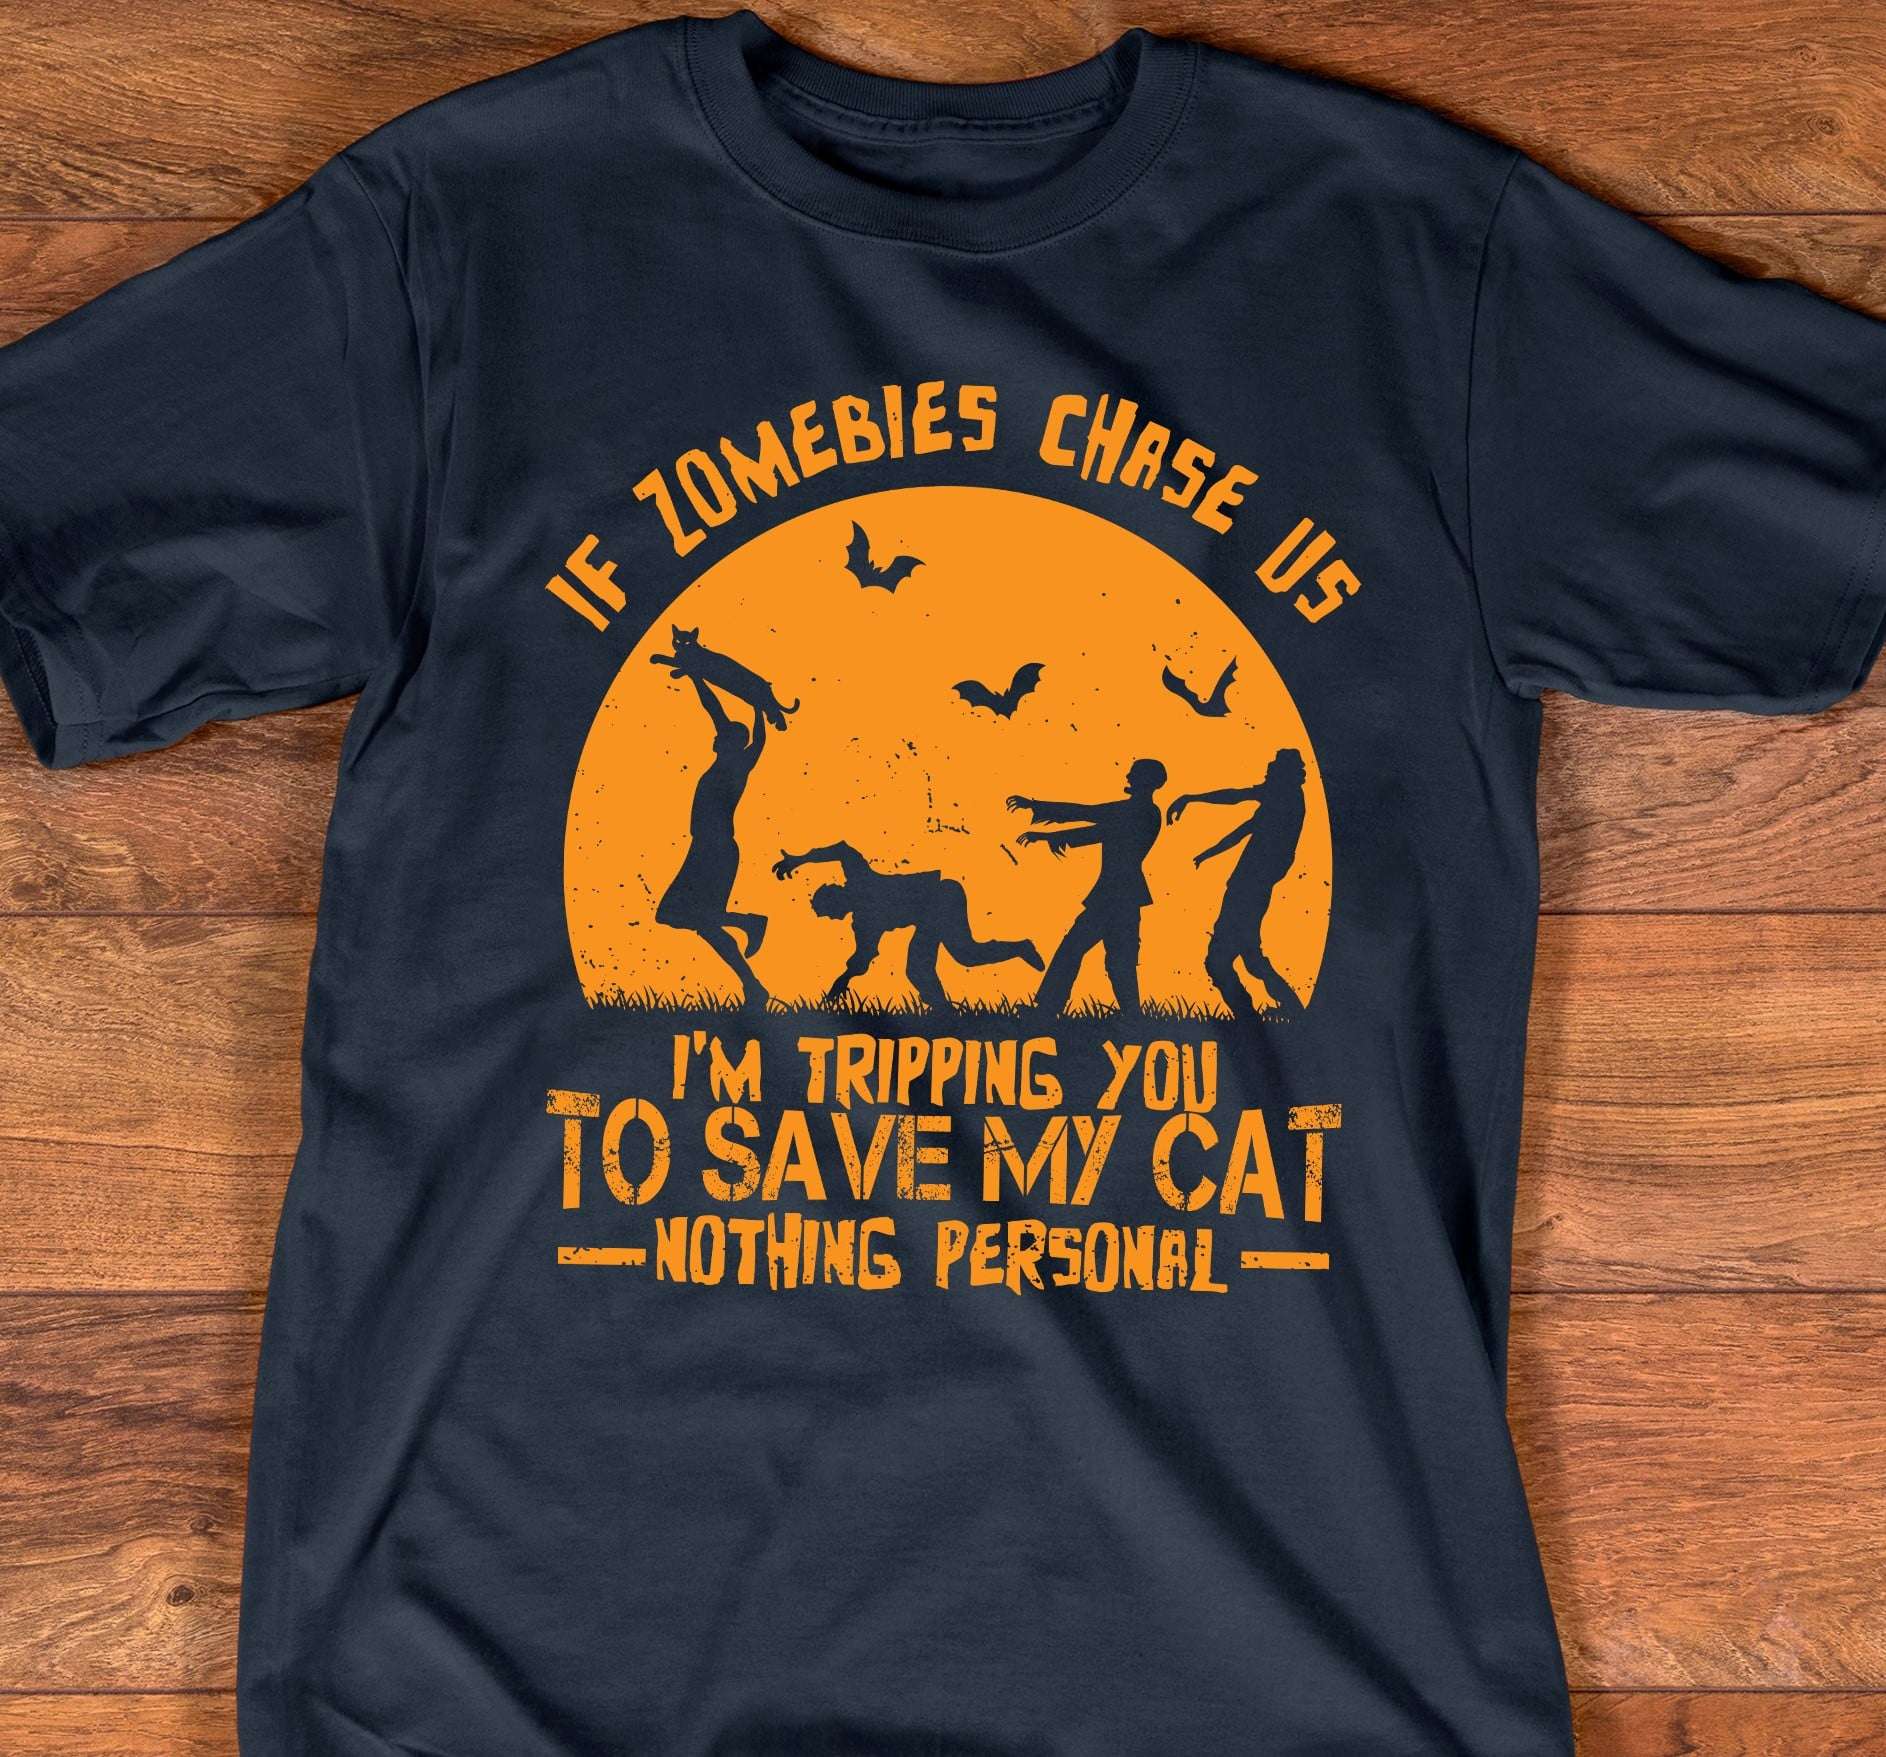 Zombie With Cat, Halloween Zombies - If zombies chase us i'm tripping you to save my cat nothing personal